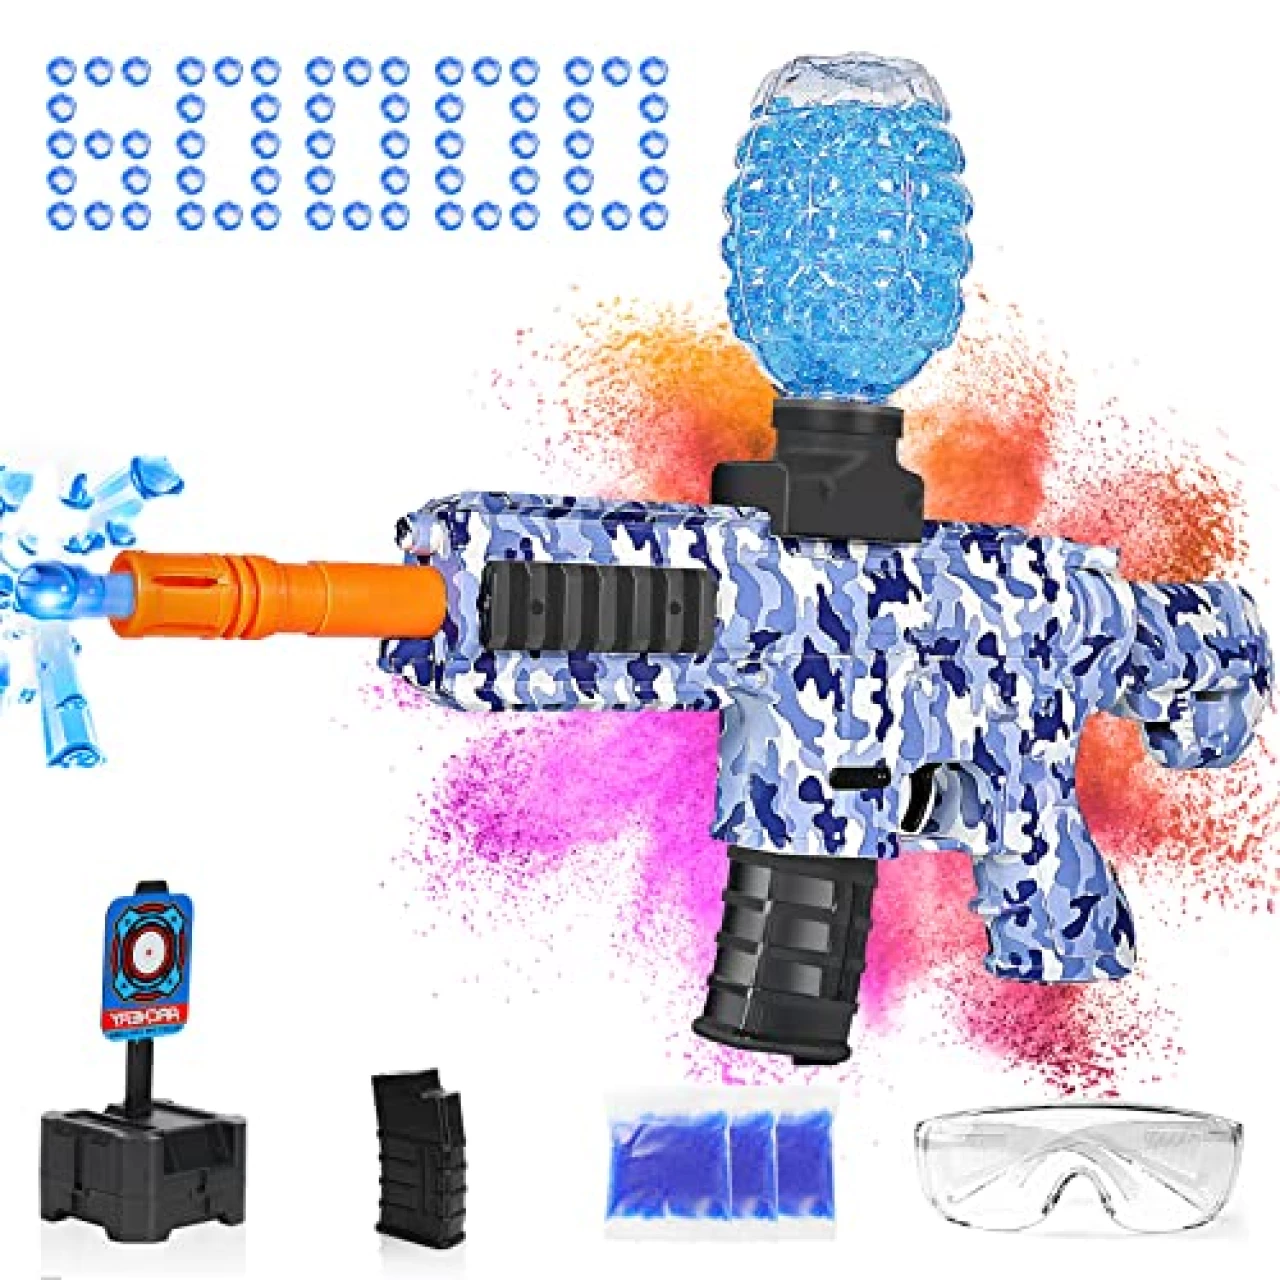 NLFGUW Electric Gel Ball Blaster Toys,Eco-Friendly Splatter Ball Blaster with 60000+ Water Beads,Automatic Outdoor Toys for Activities Team Game,for Adults and Kids Ages 12+(Blue)